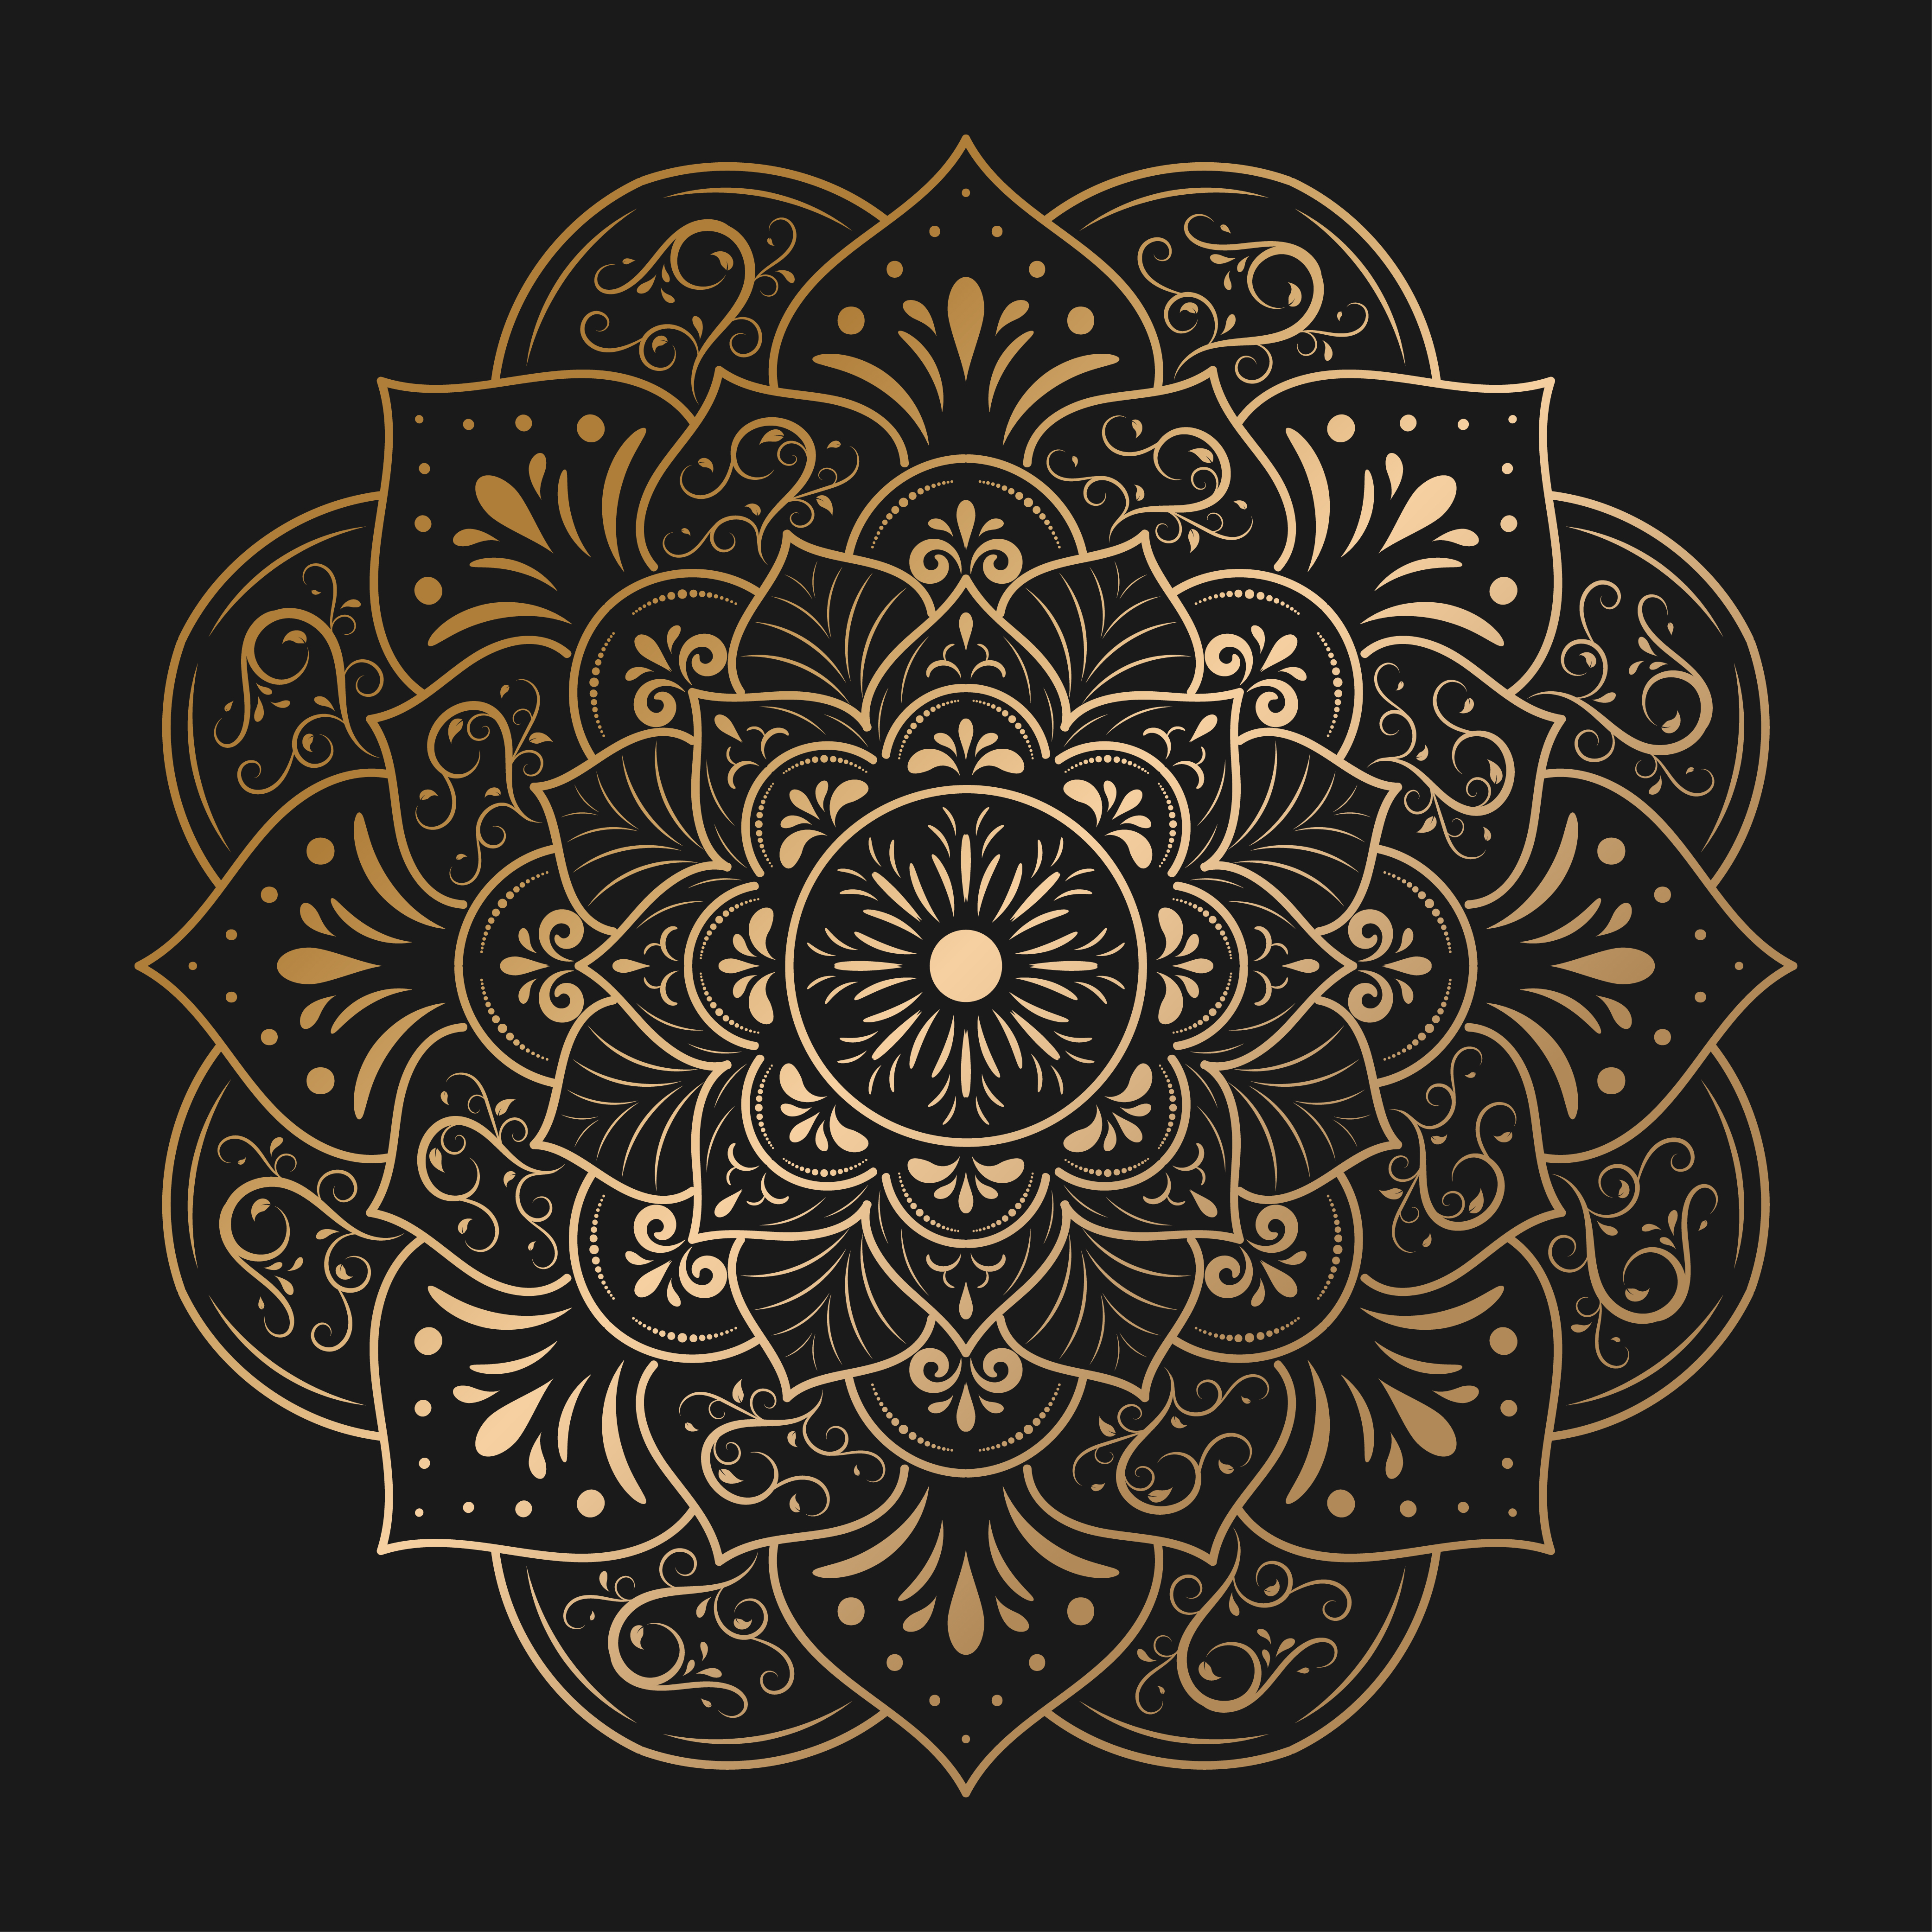 Download Circular gold mandala with vintage floral style - Download ...